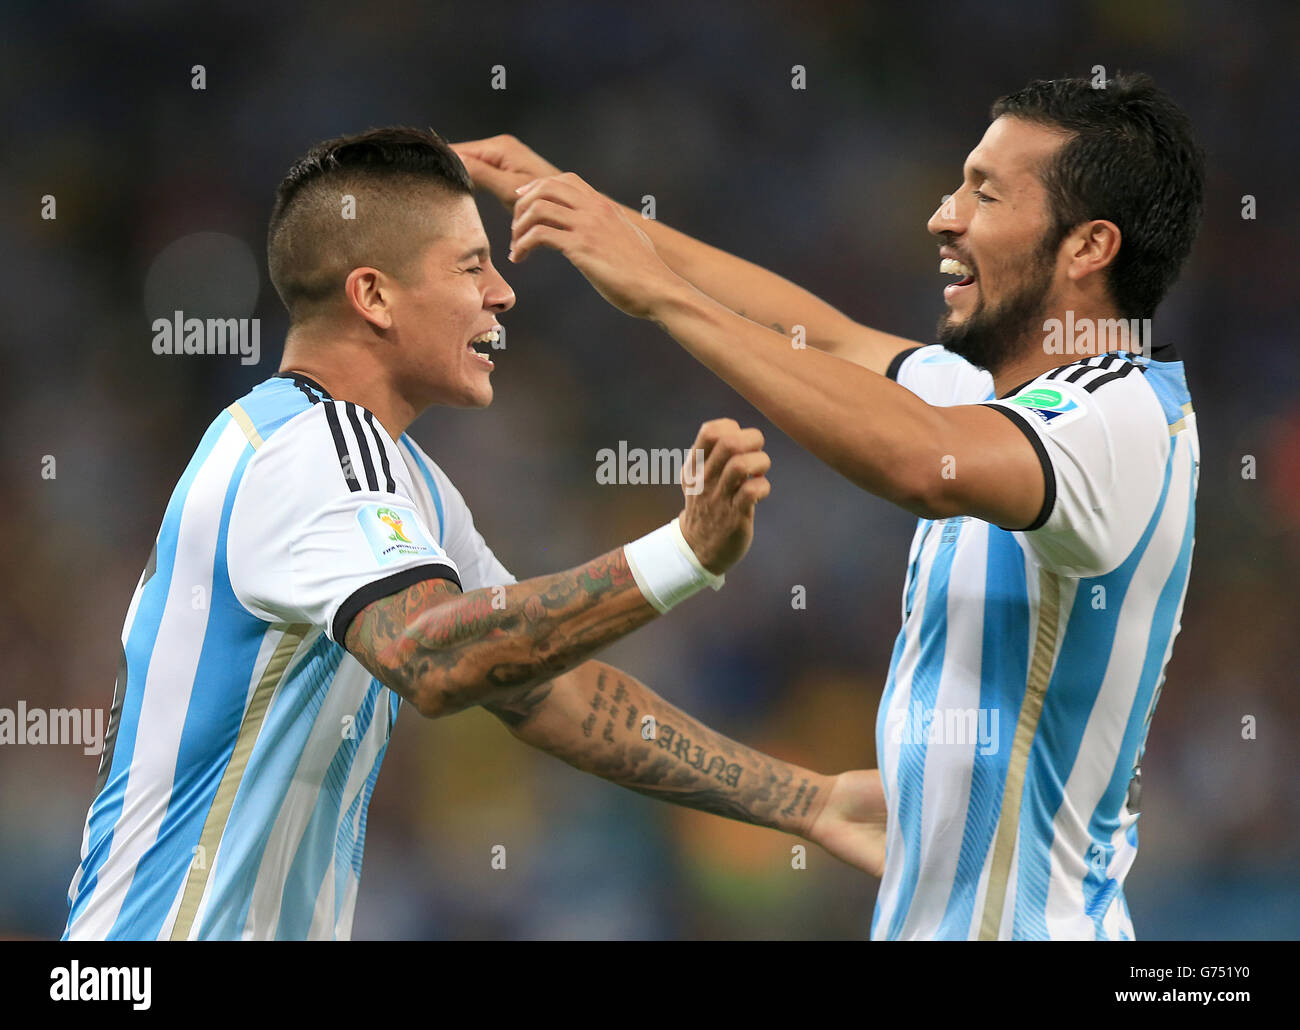 Argentina's Ezequiel Garay (front) and Argentina's Marcos Rojo celebrate after Bosnia and Herzegovina's Sead Kolasinac scores an own goal Stock Photo